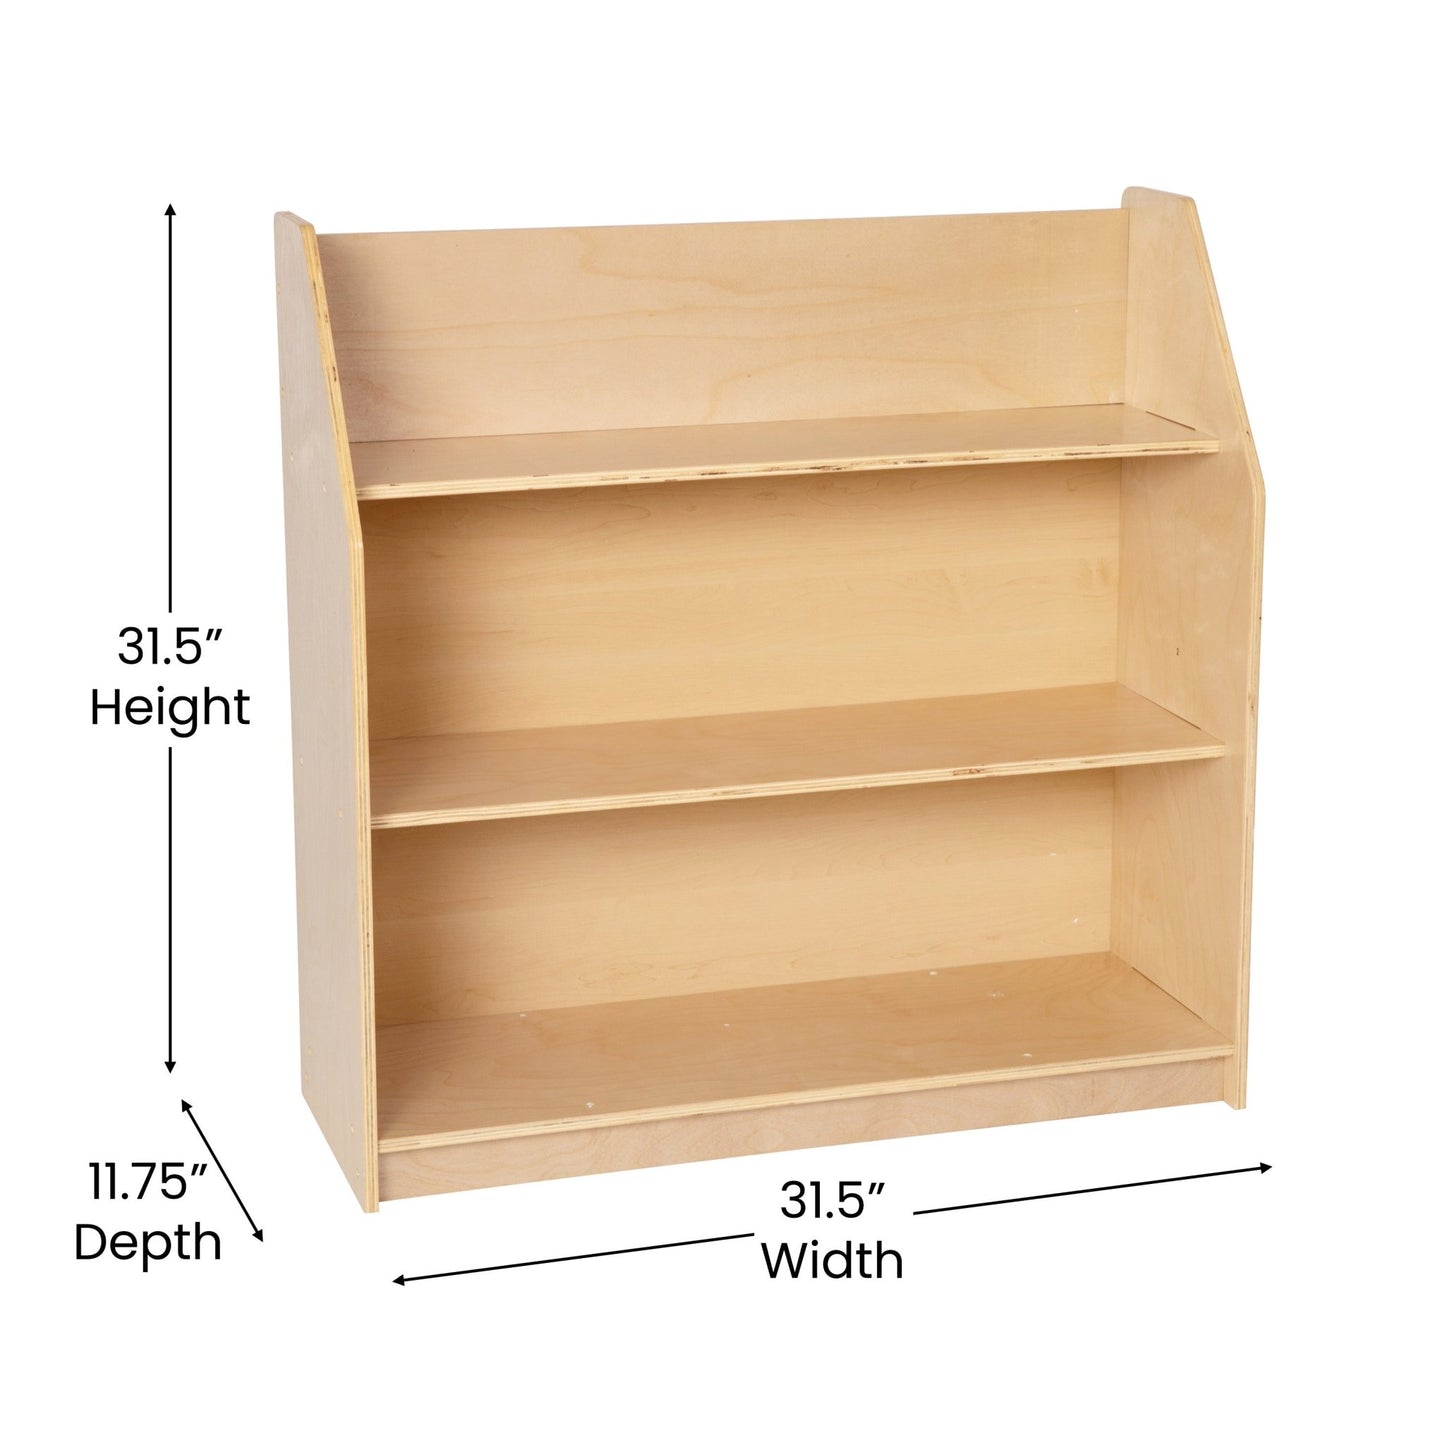 Hercules Natural Wooden 3 Shelf Book Display with Safe, Kid Friendly Curved Edges - Commercial Grade for Daycare, Classroom or Playroom Storage - SchoolOutlet